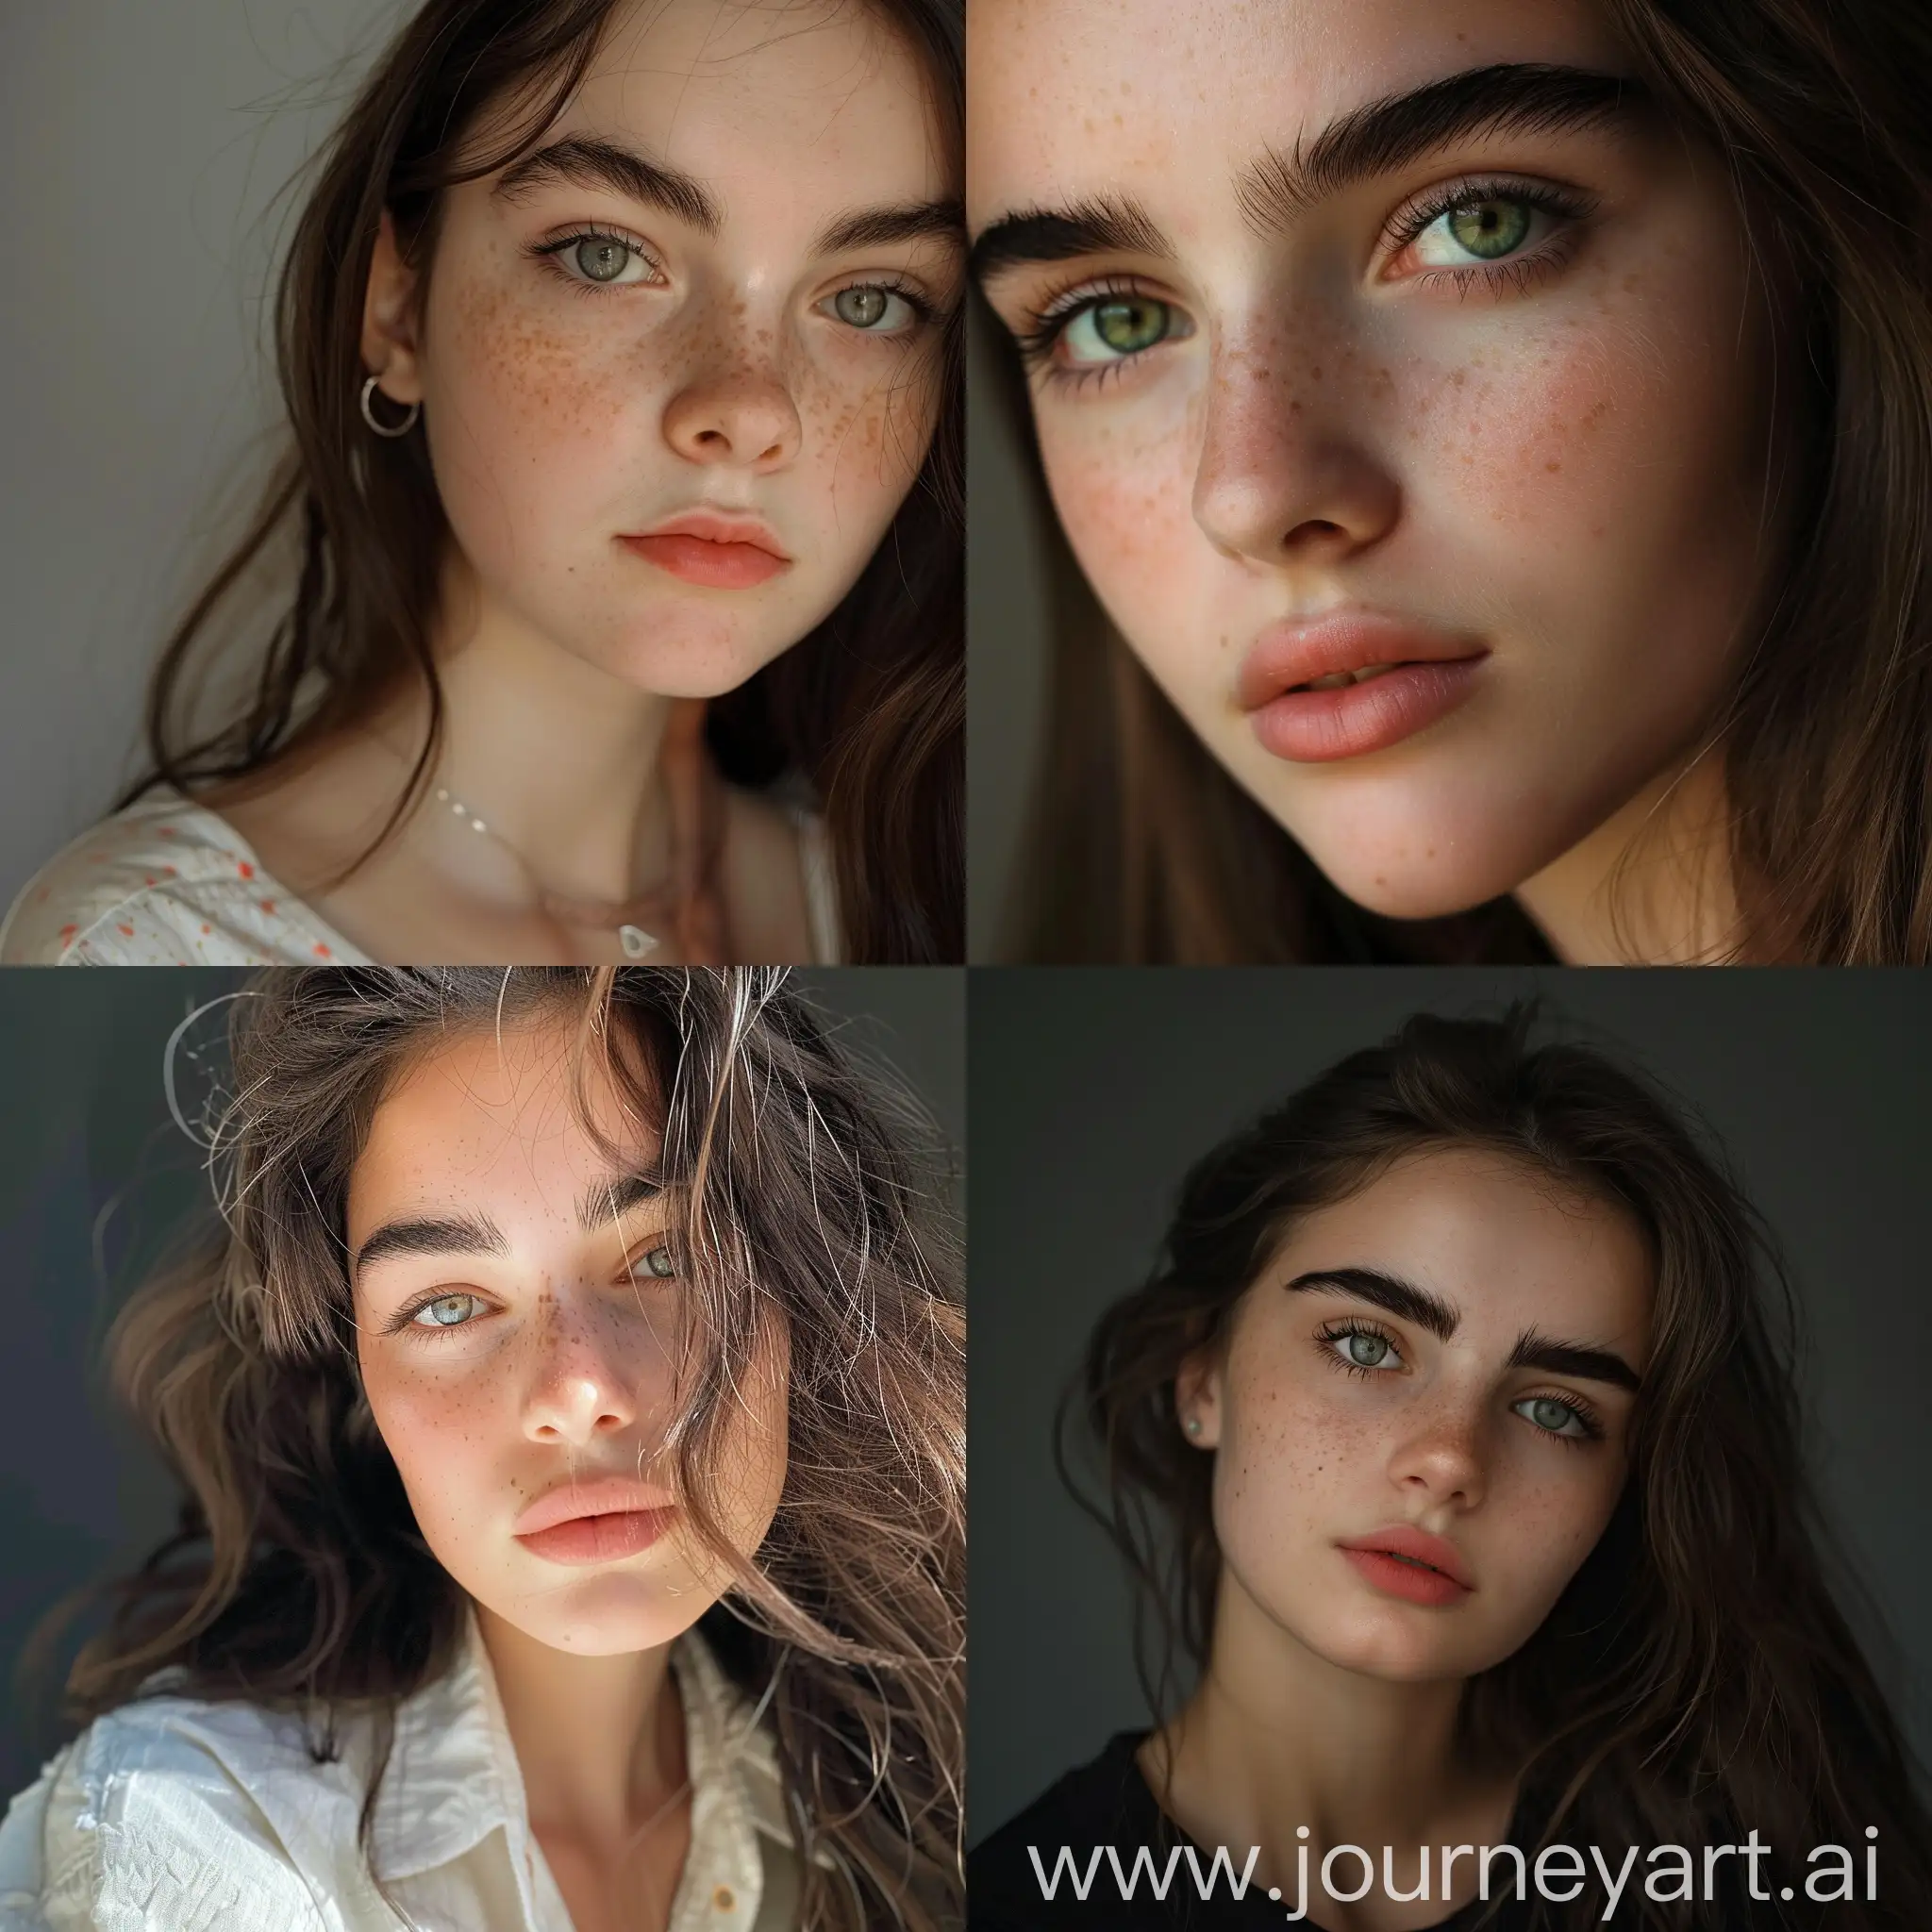 Aesthetic instagram photograph of a 15 year old teenage girl super model, bushy eyebrows, gorgeous face, professional photograph, studio